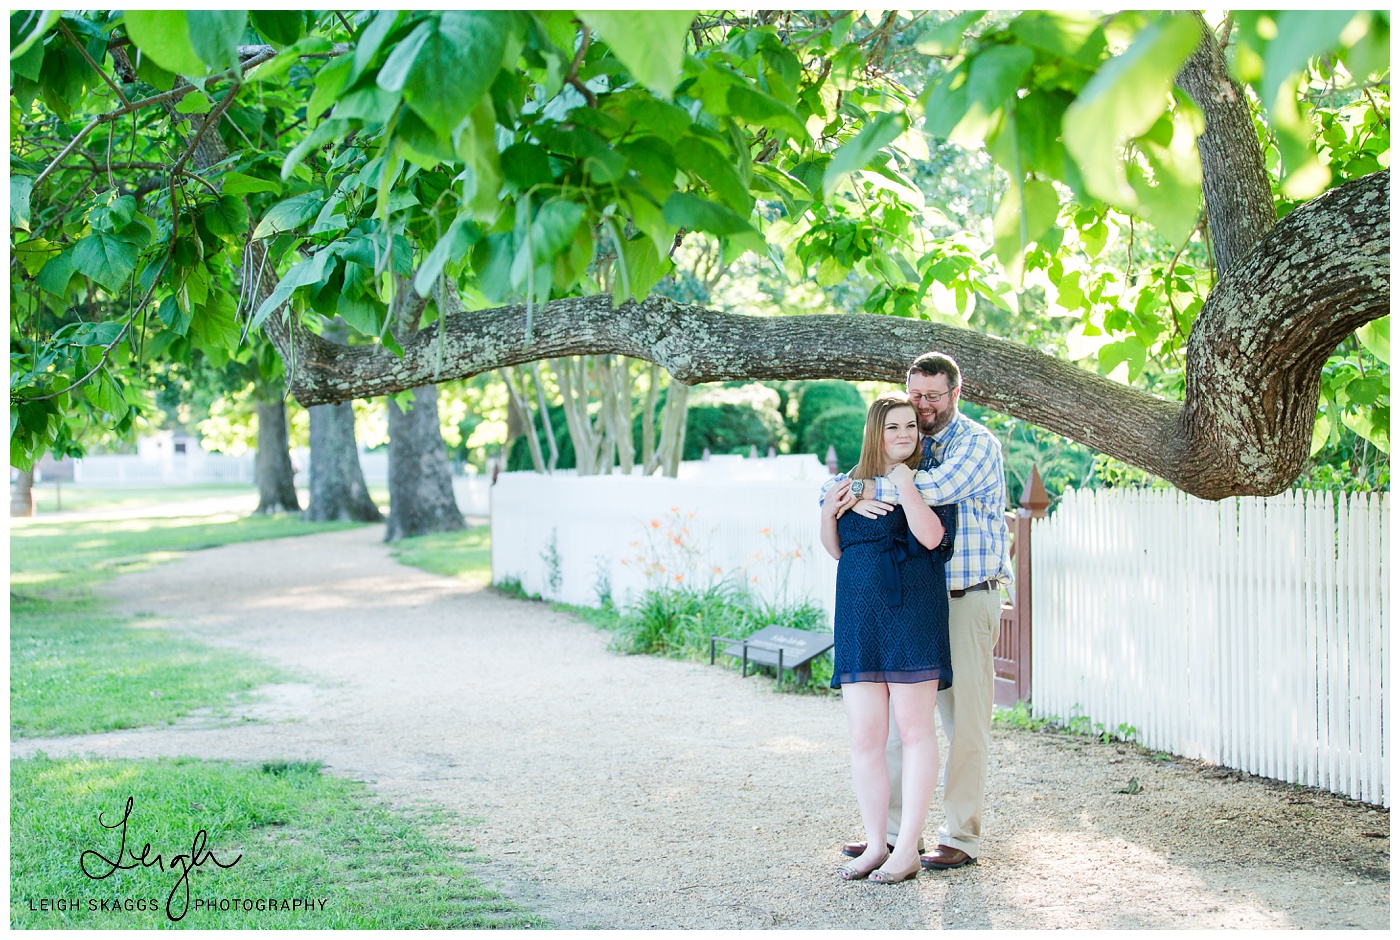 Colonial Williamsburg Engagement session!